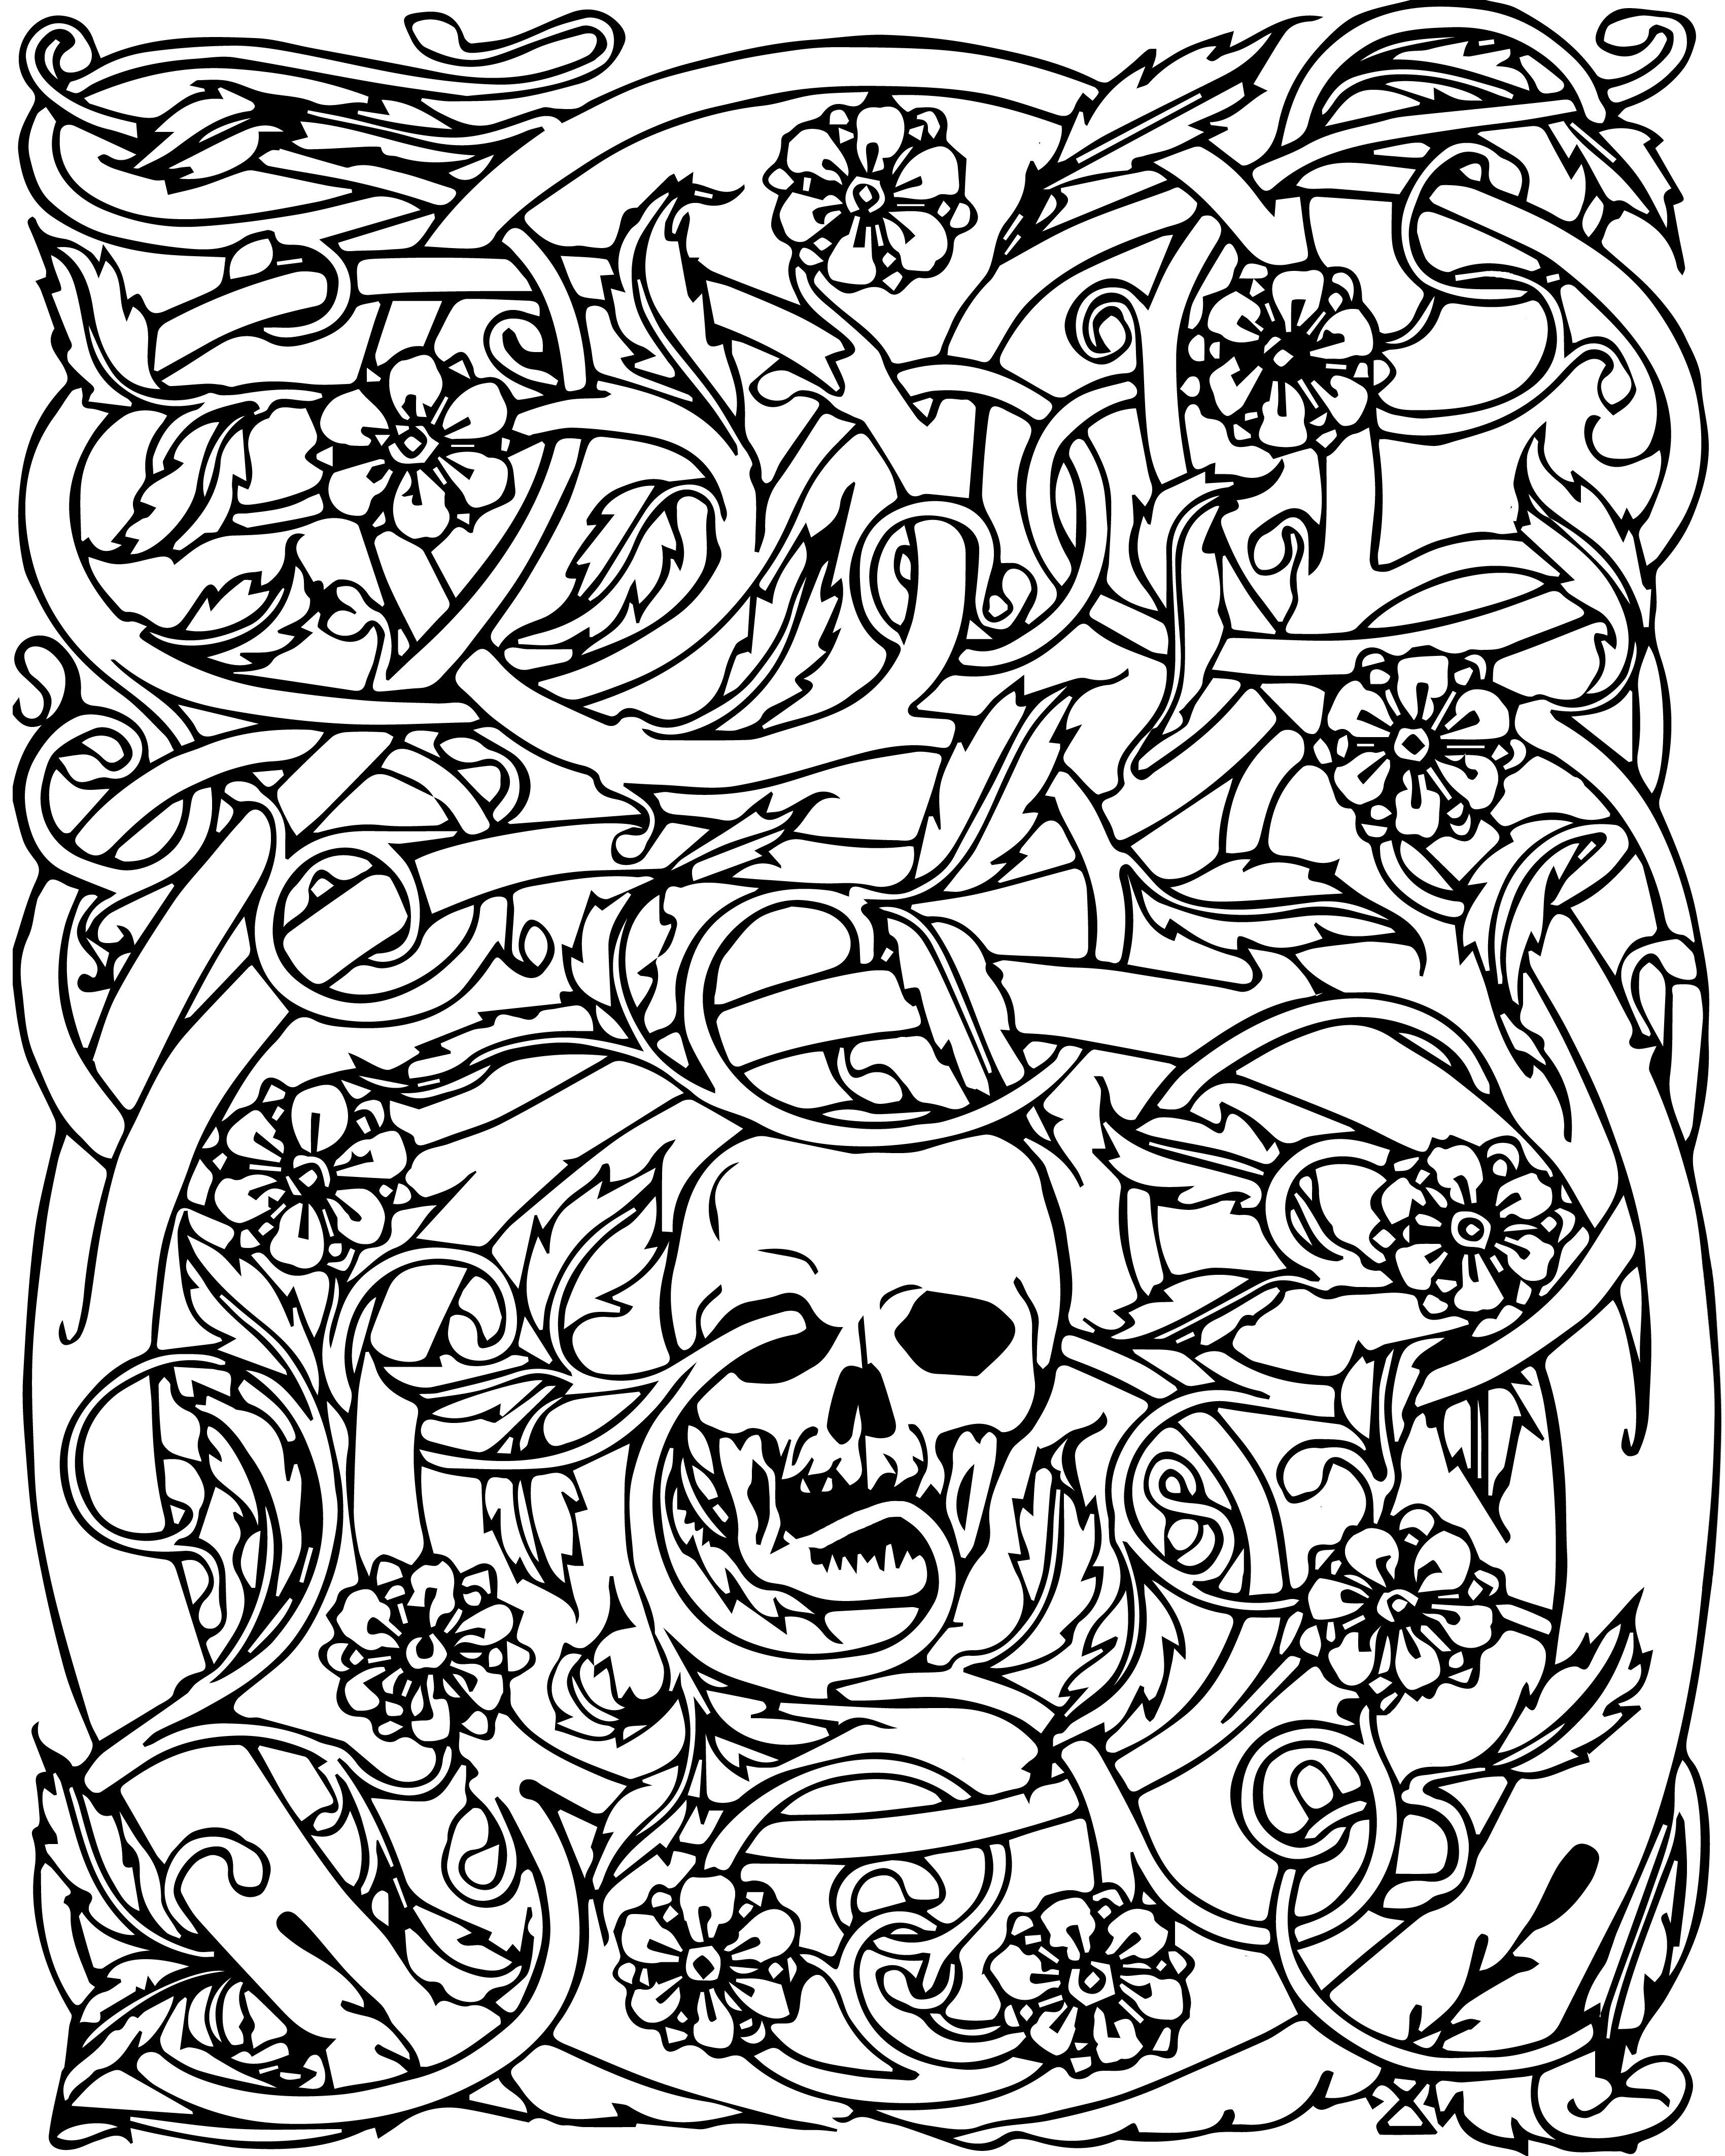 Free Pdf Coloring Pages For Adults
 free adult coloring pages pdf Coloring